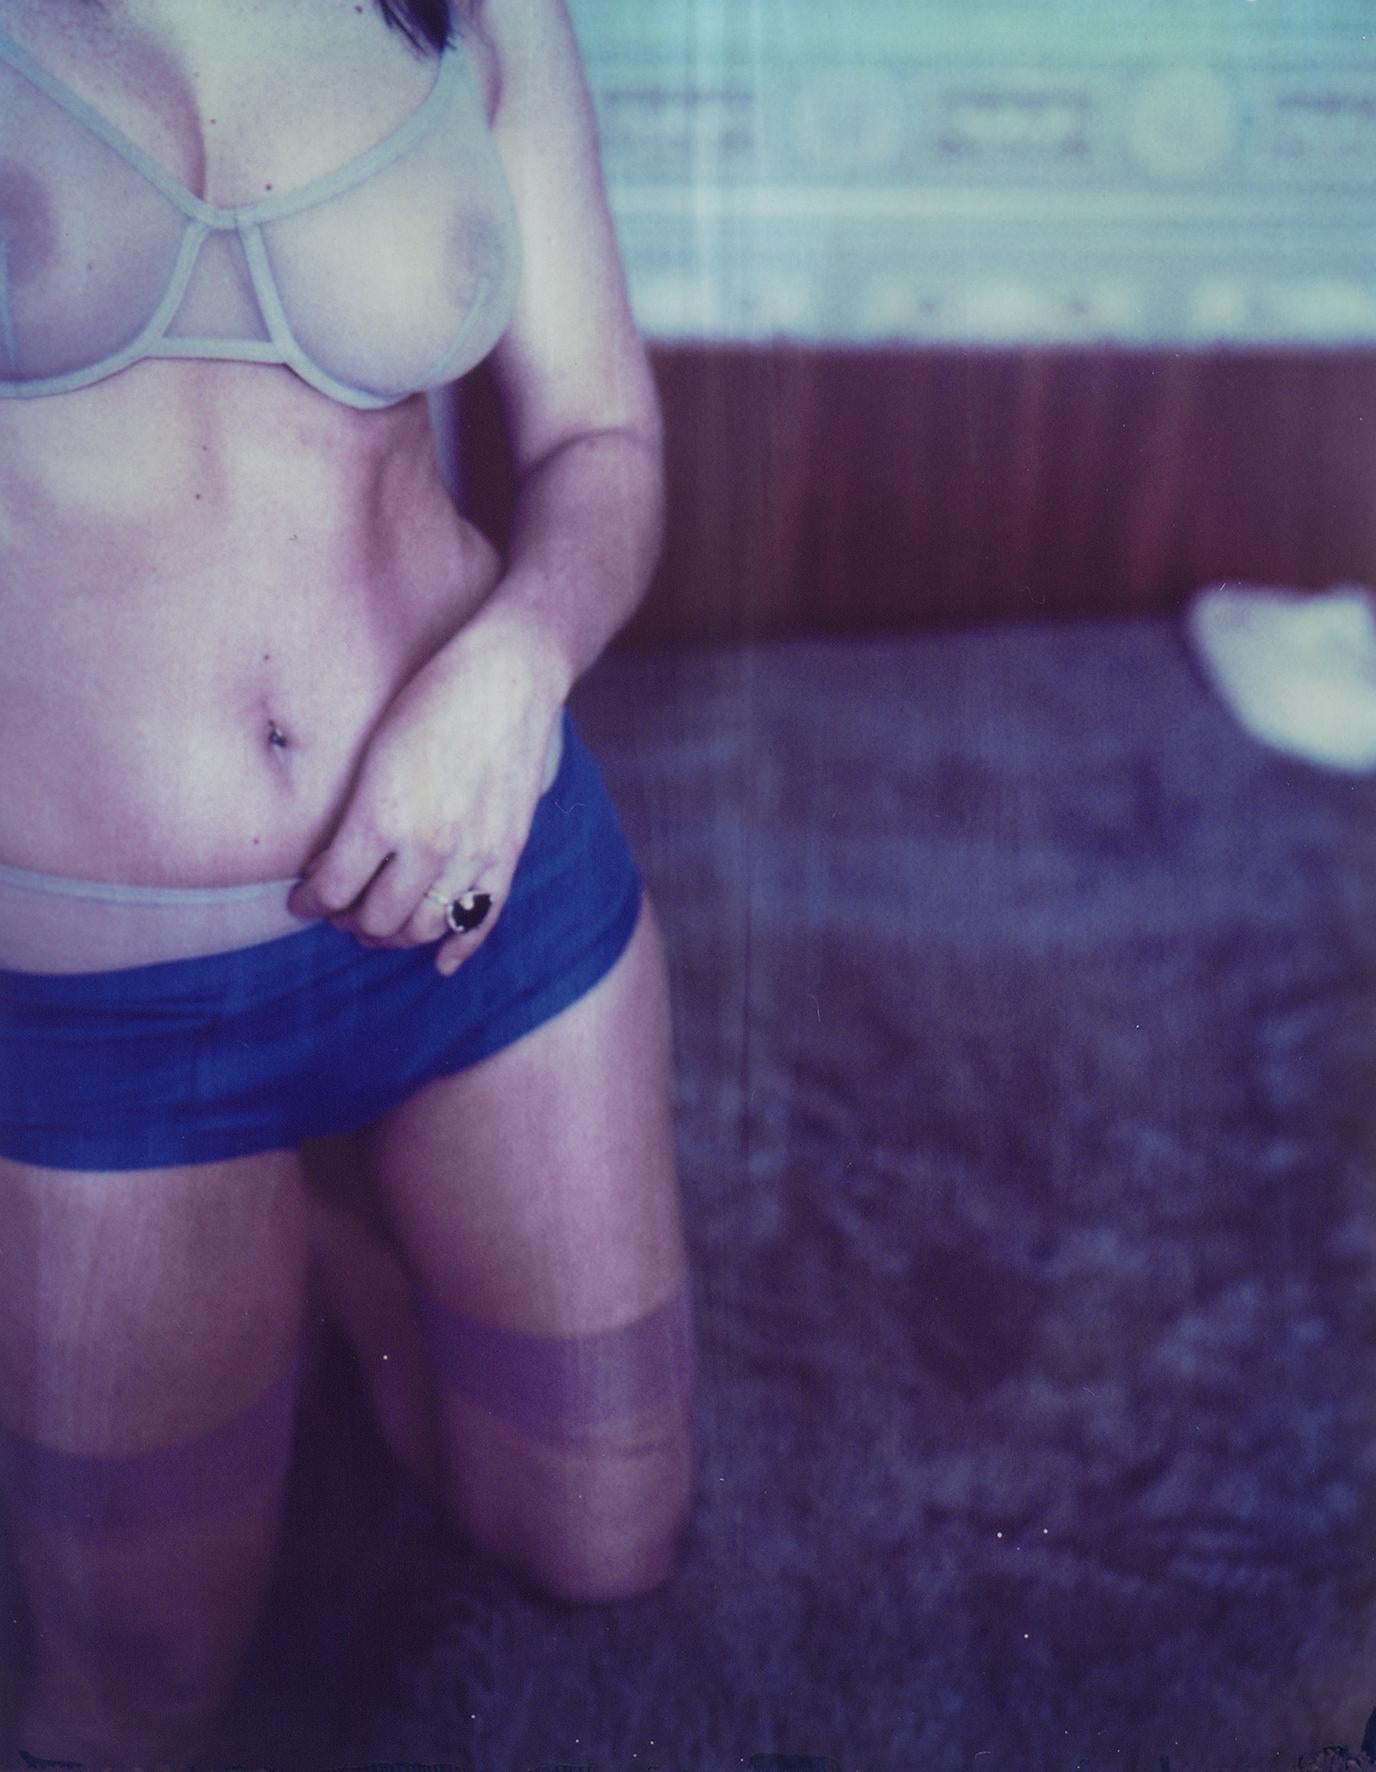 Carmen de Vos Color Photograph - Girl Manoeuvres - 01 - from the series Dunderwear